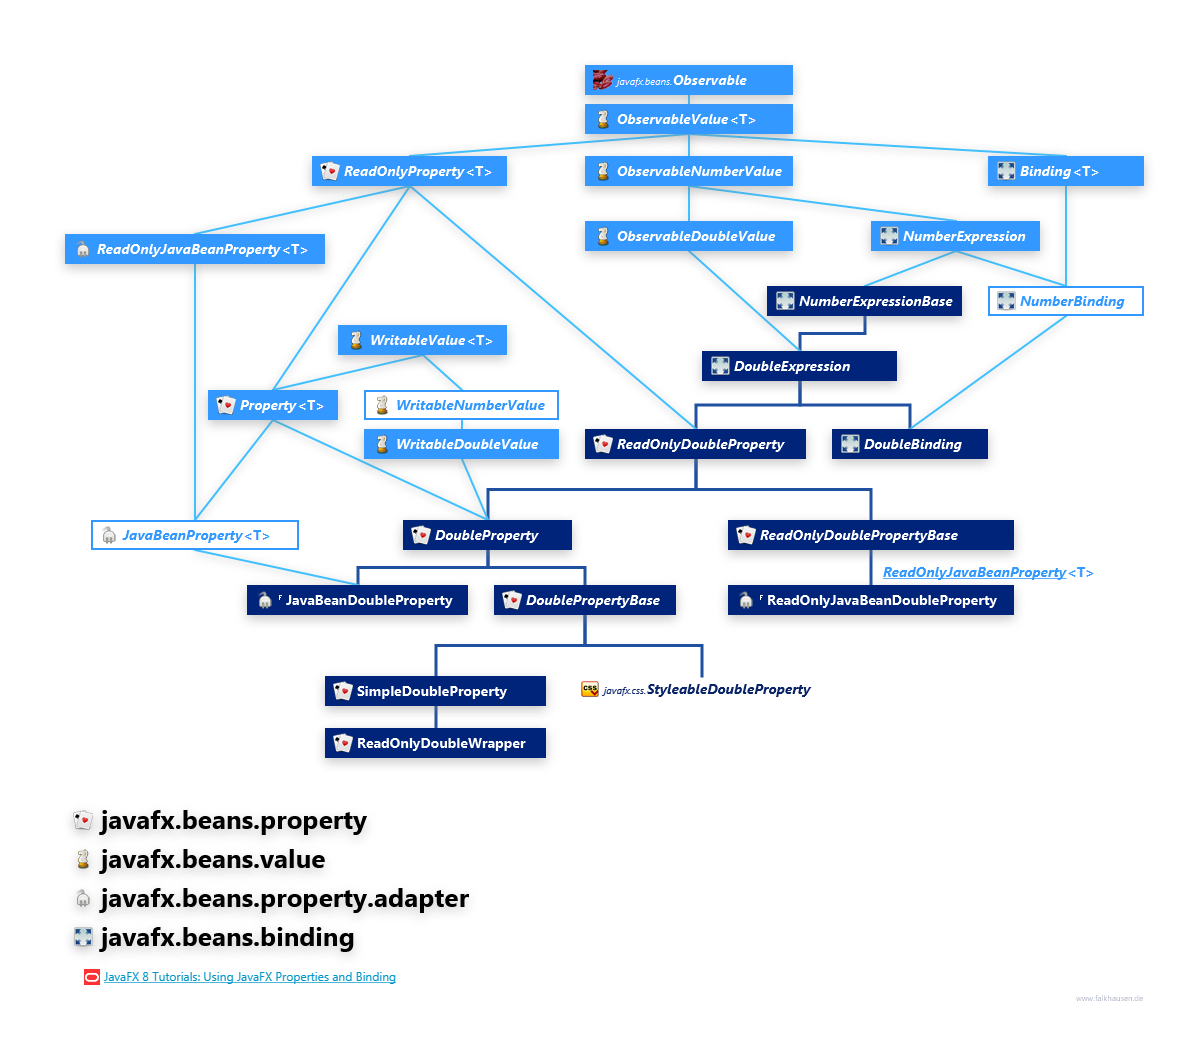 javafx.beans.property javafx.beans.value javafx.beans.property.adapter javafx.beans.binding DoubleProperty Hierarchy class diagram and api documentation for JavaFX 8